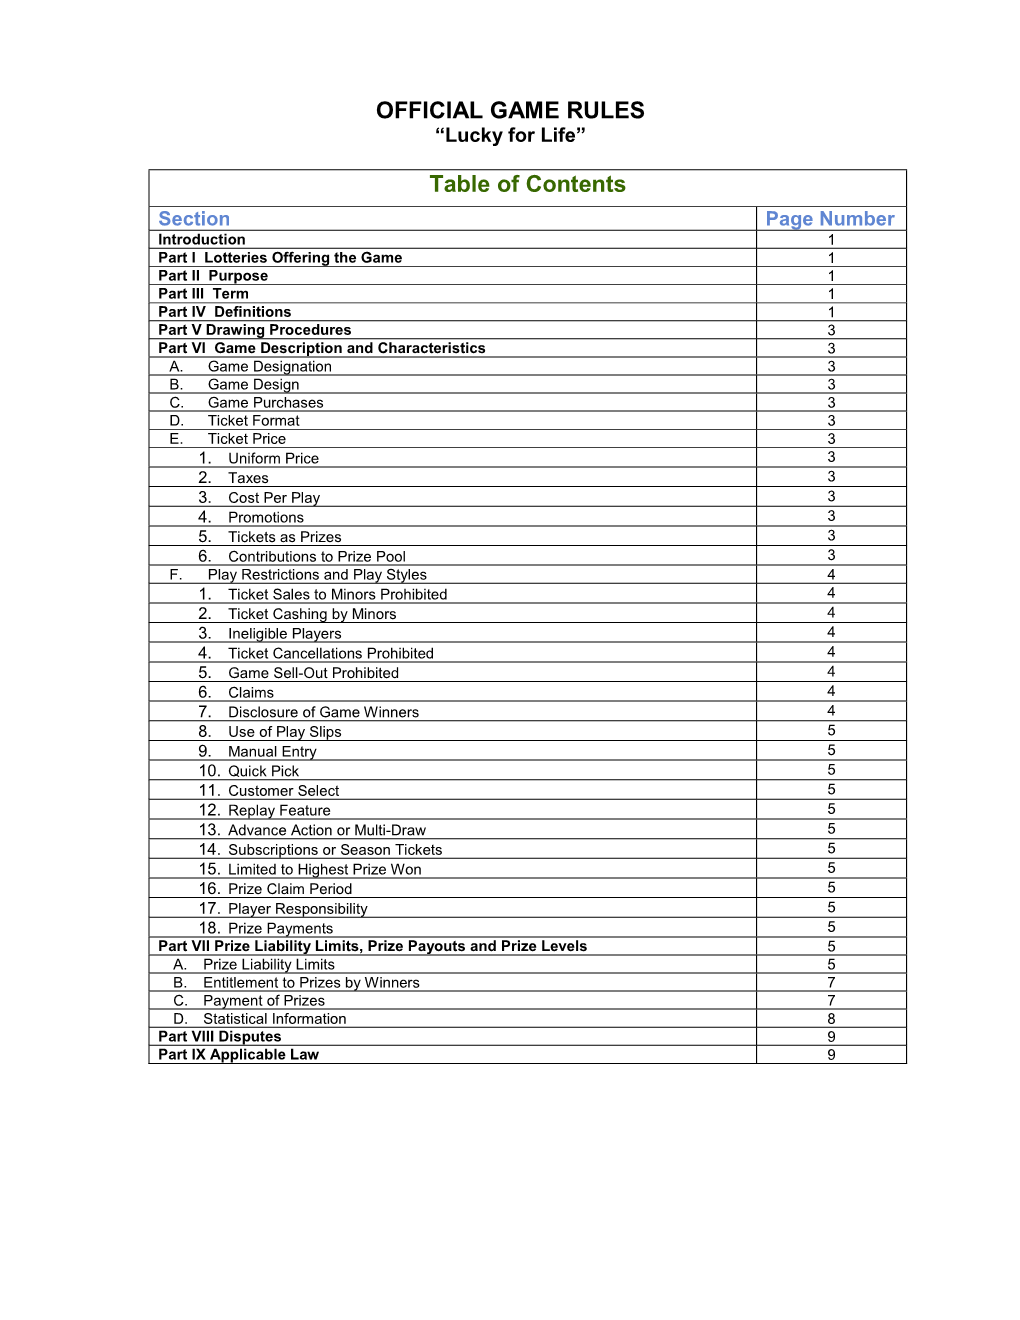 OFFICIAL GAME RULES Table of Contents